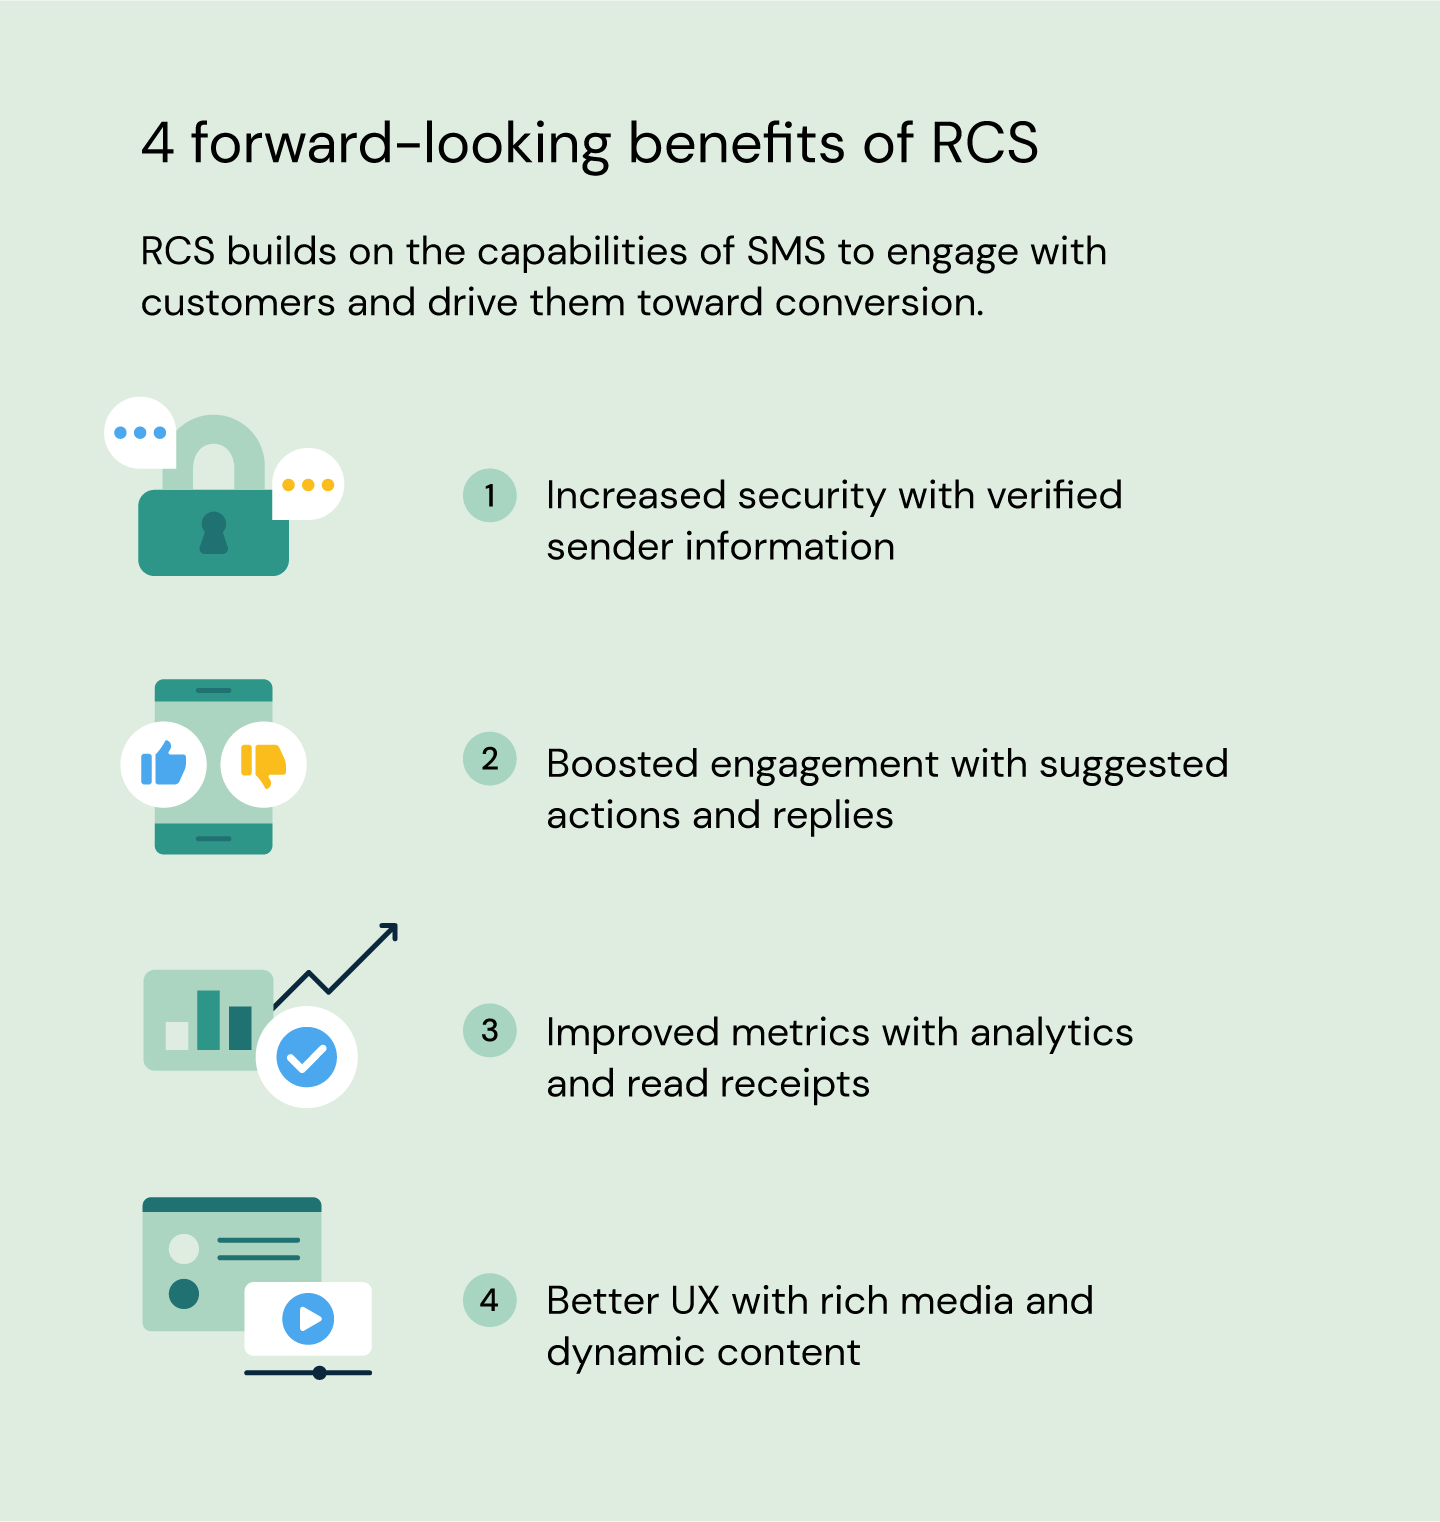 4 benefits of RCS vs SMS include increased security, boosted engagement, improved metrics, and better UX.